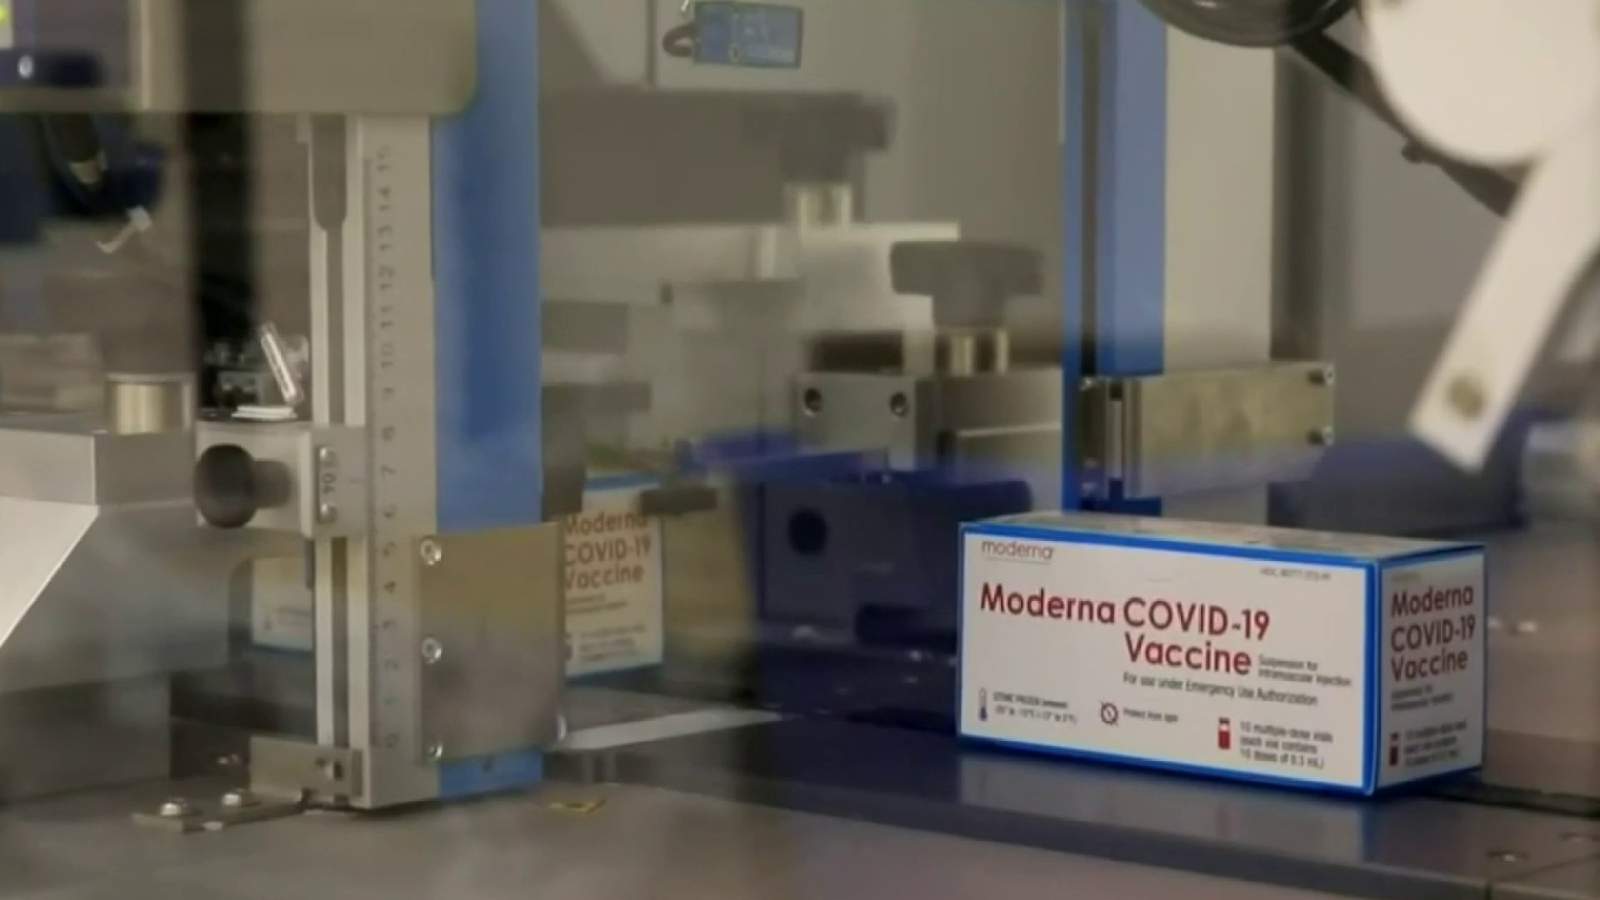 Nearly 12K doses of Modern COVID-19 vaccine destroyed on road to Michigan, state officials say